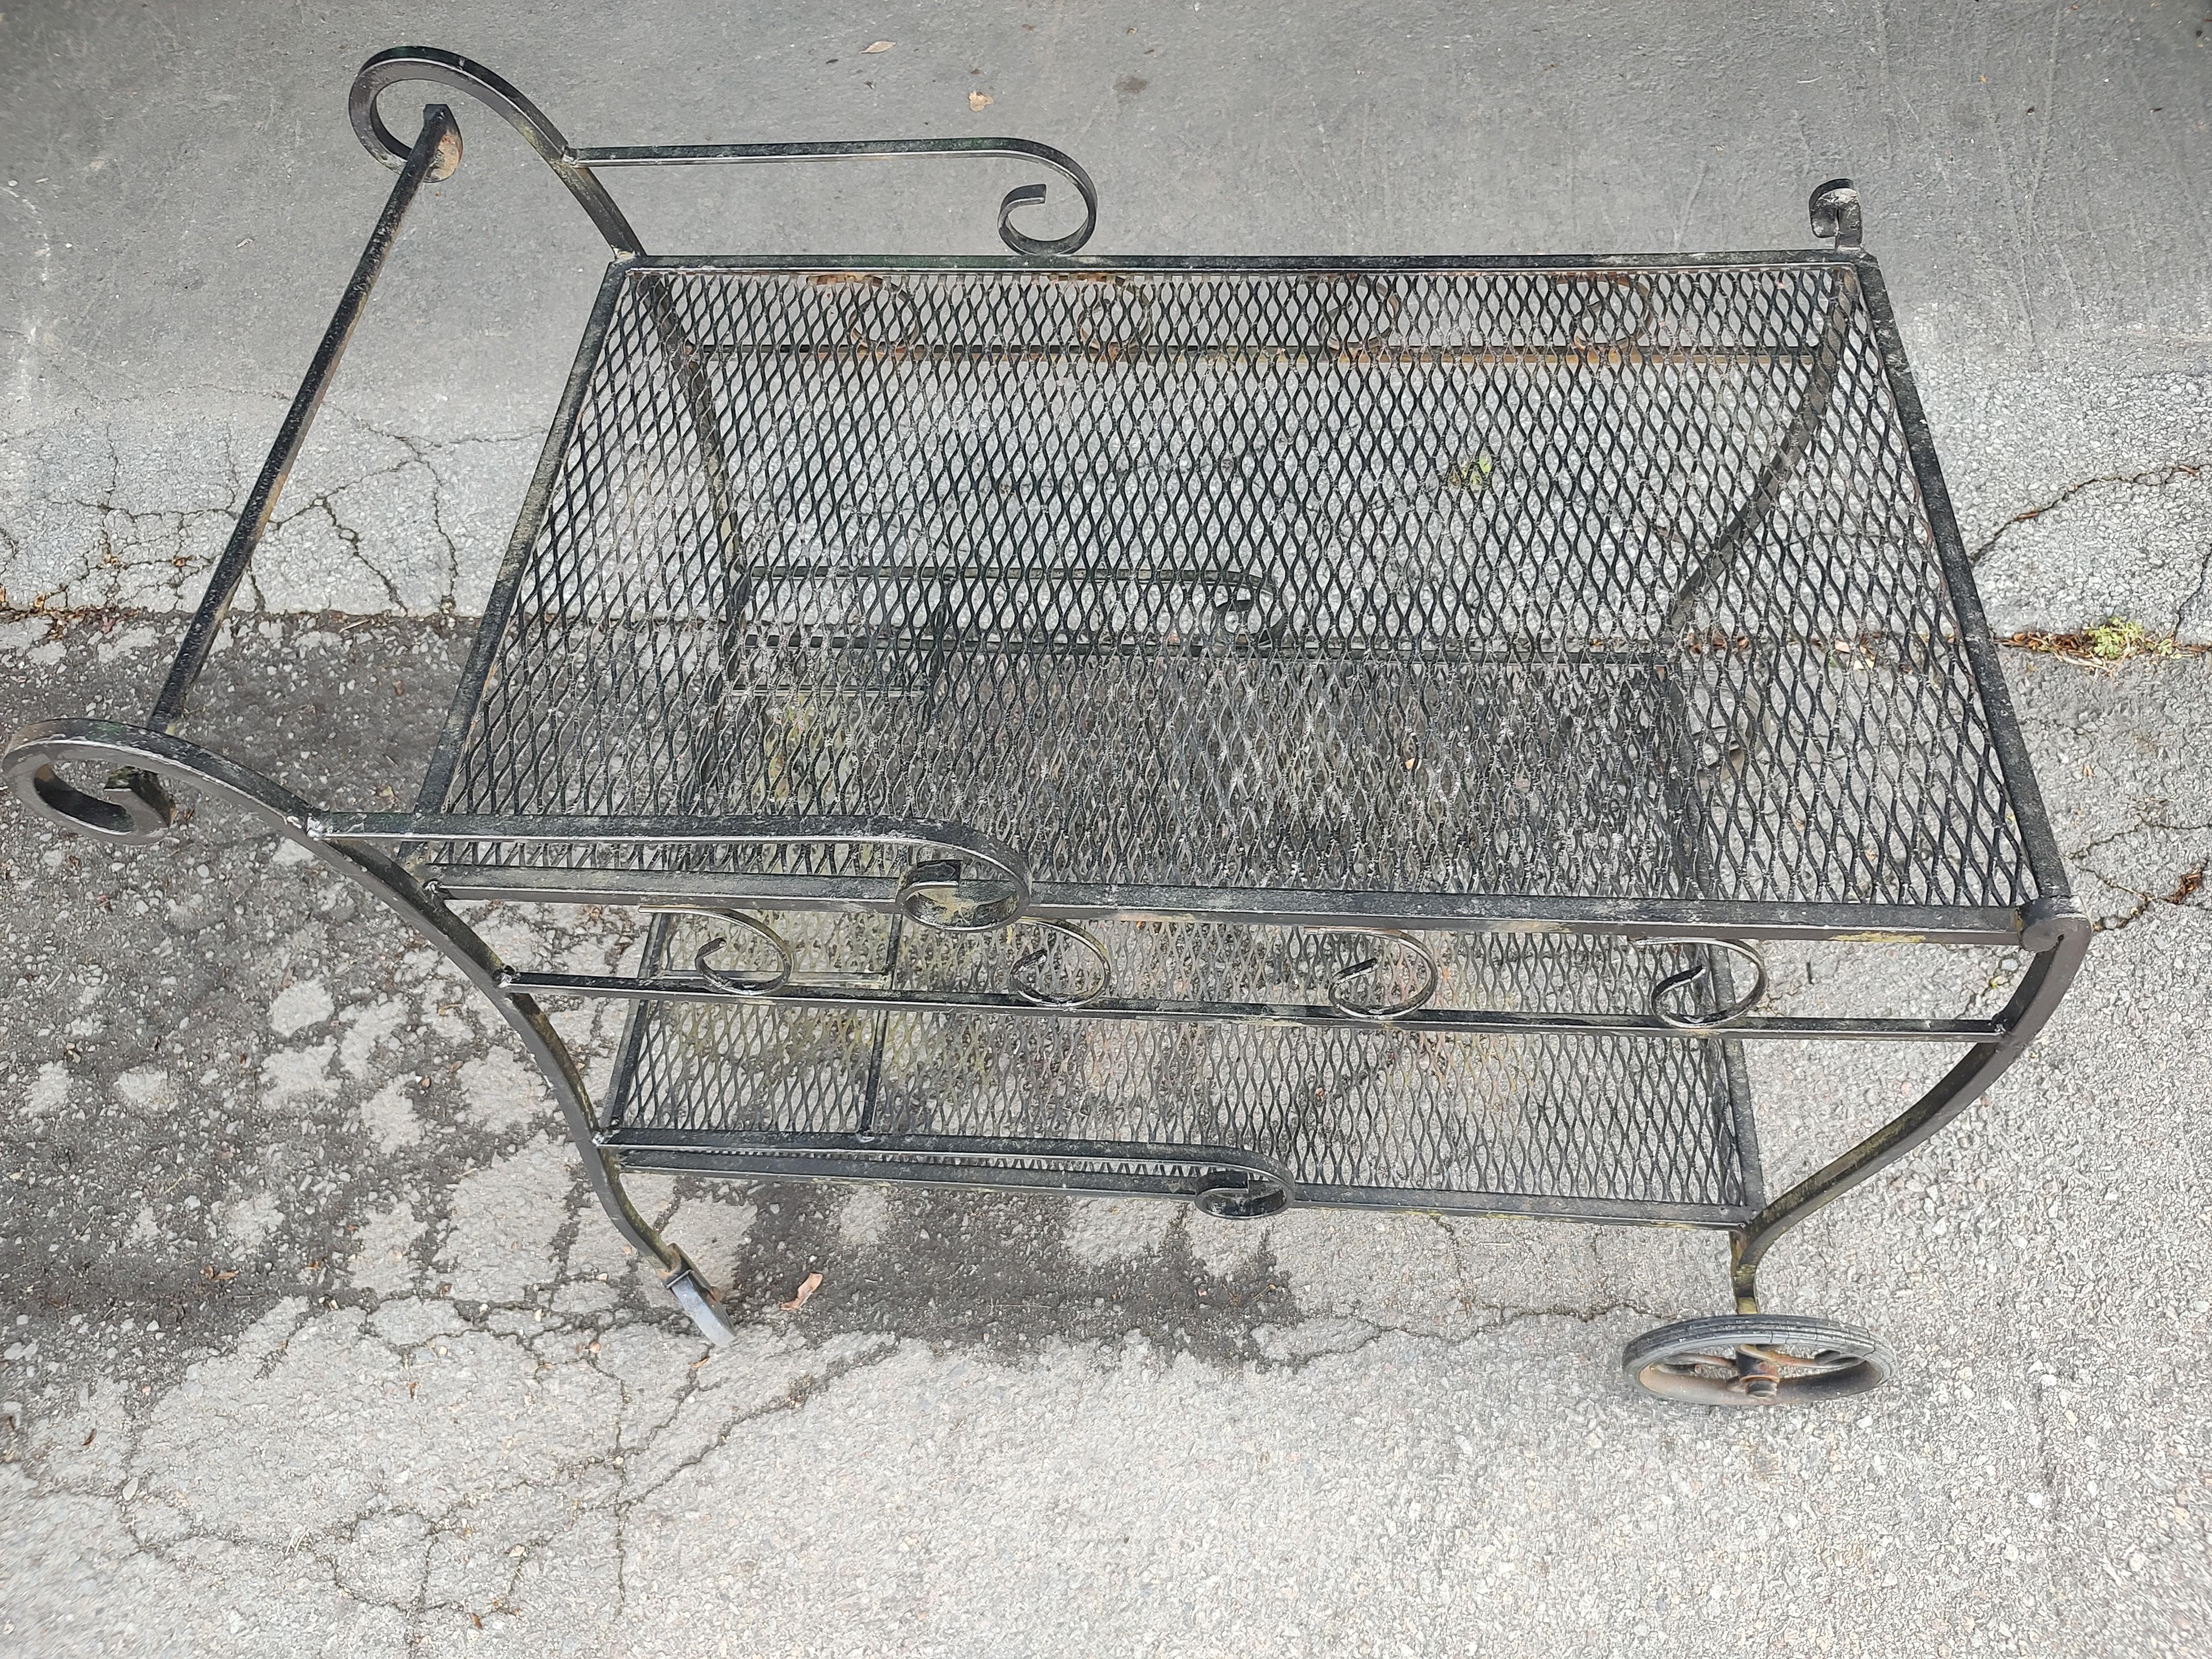 Mid-20th Century Mid-Century Modern Wrought Iron Outdoor Bar Cart with Liquor Bottle Holder For Sale